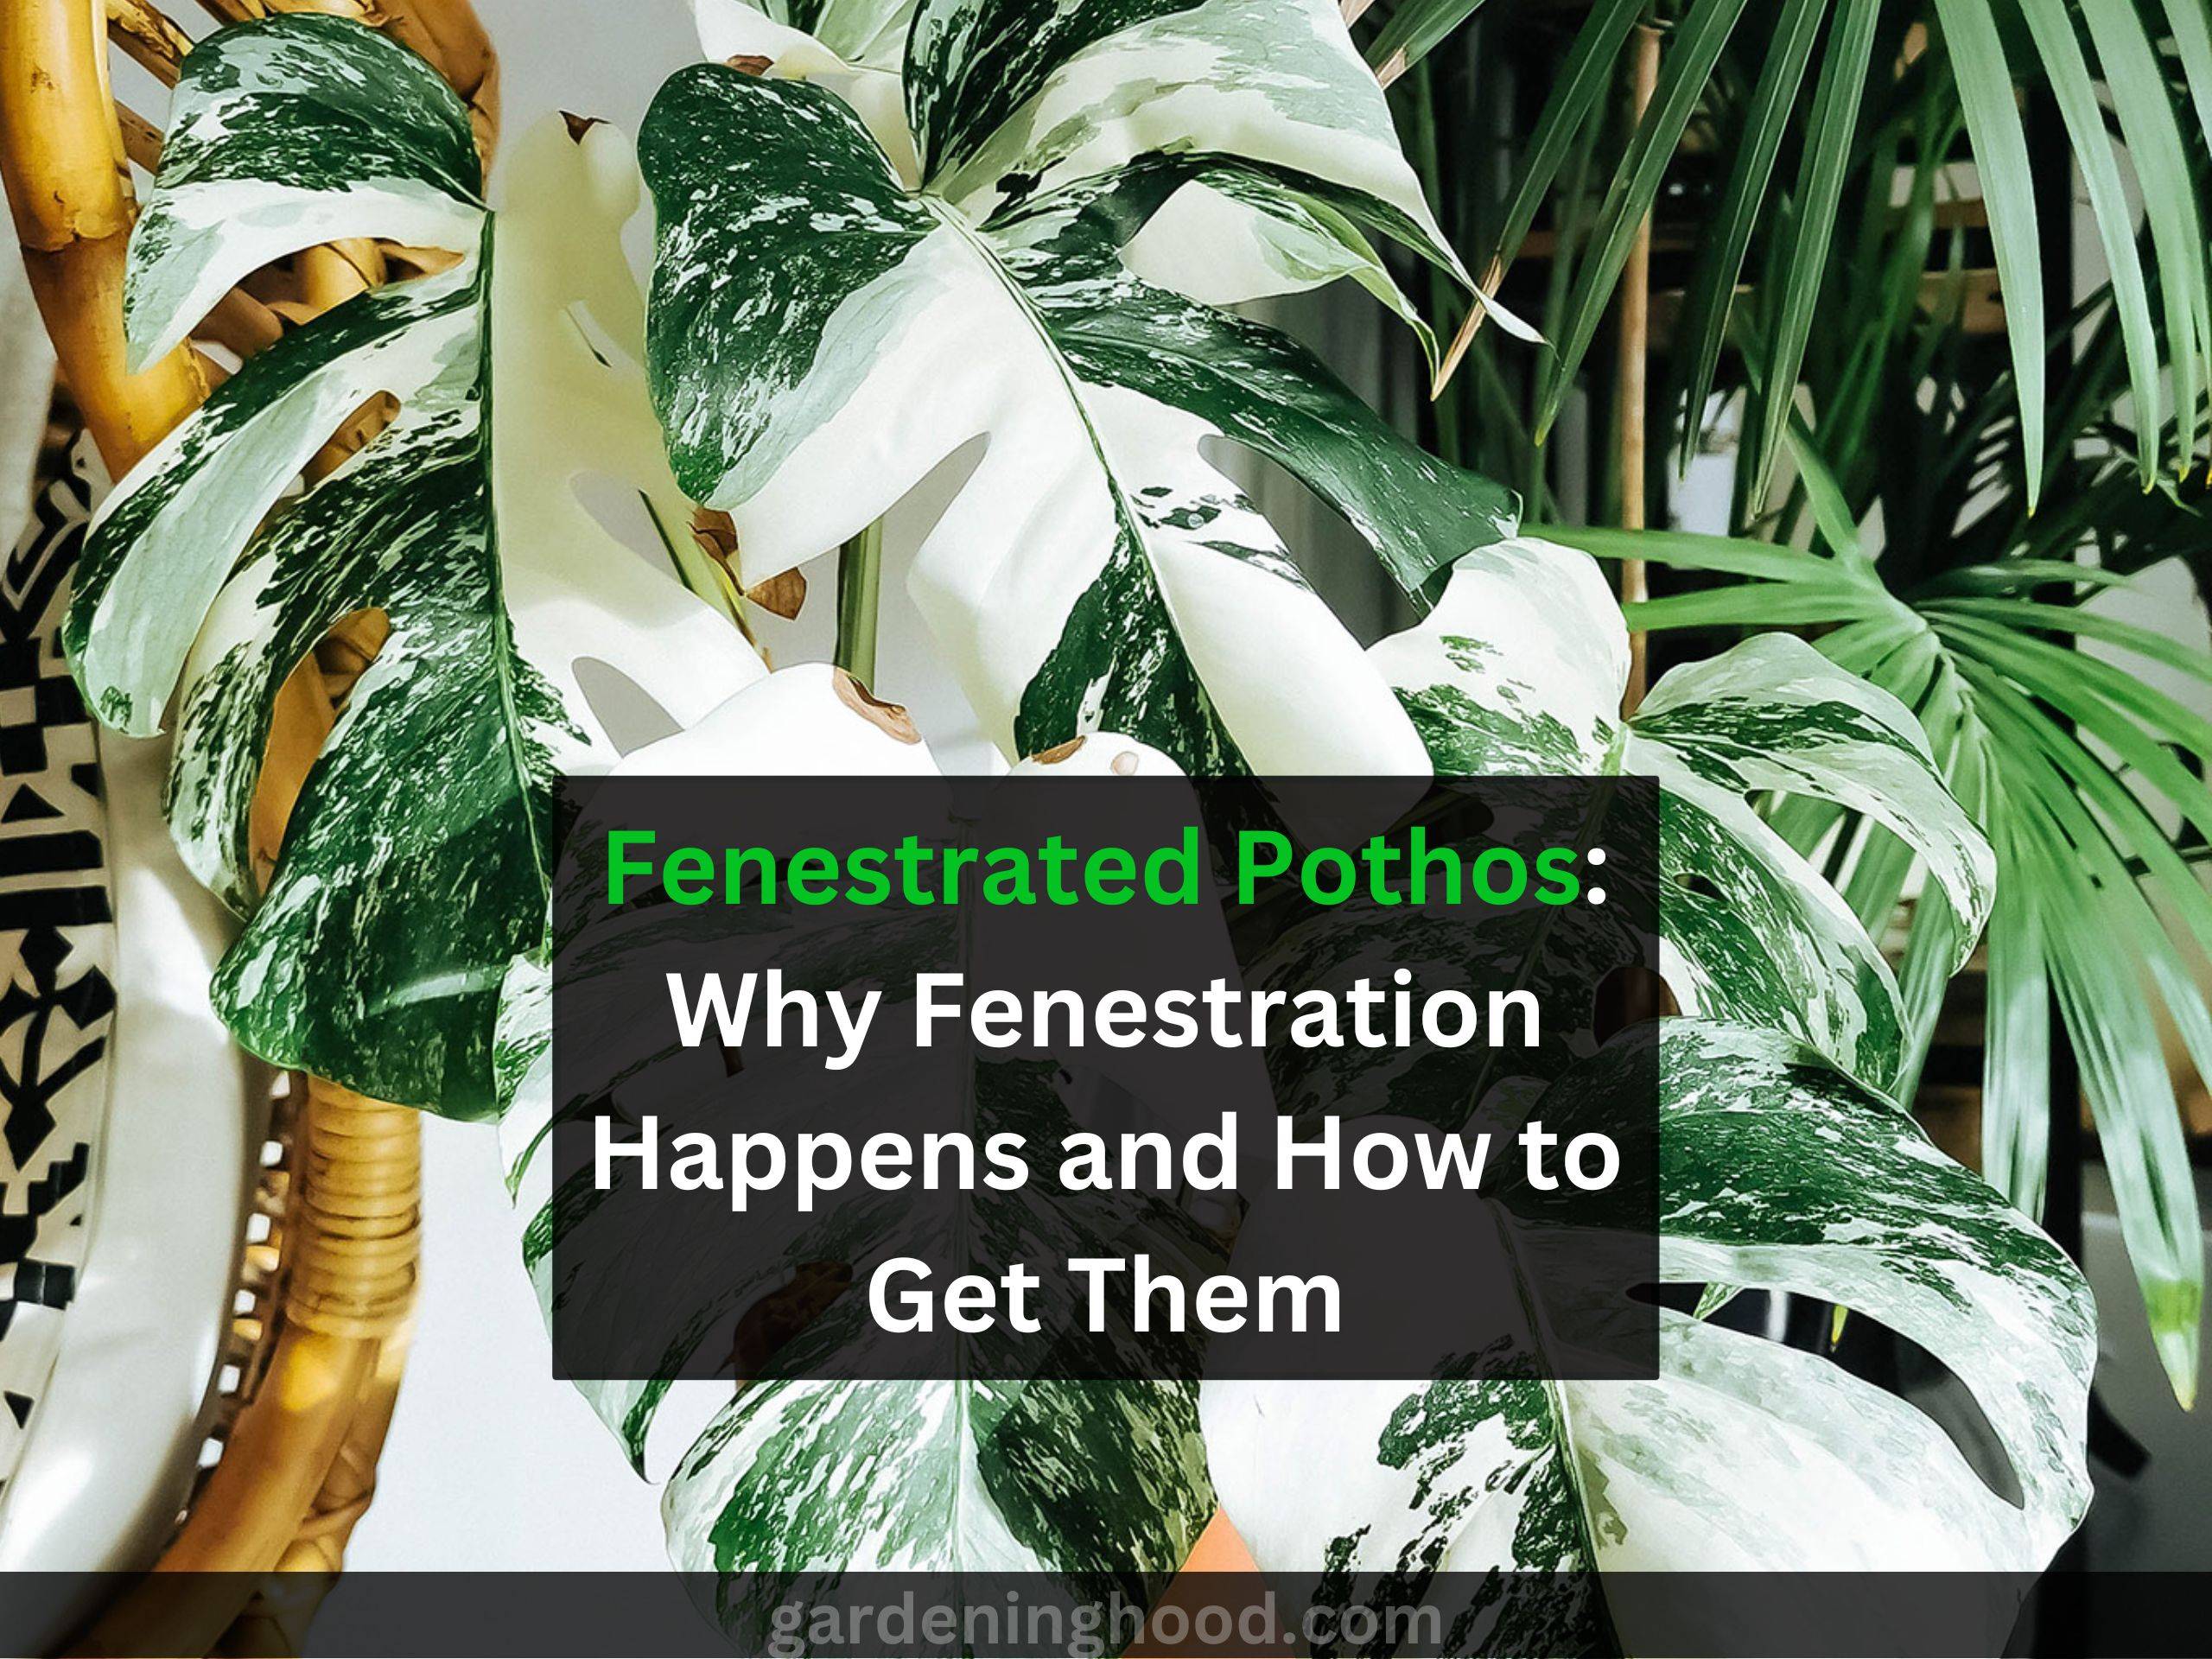 Fenestrated Pothos: Why Fenestration Happens and How to Get Them